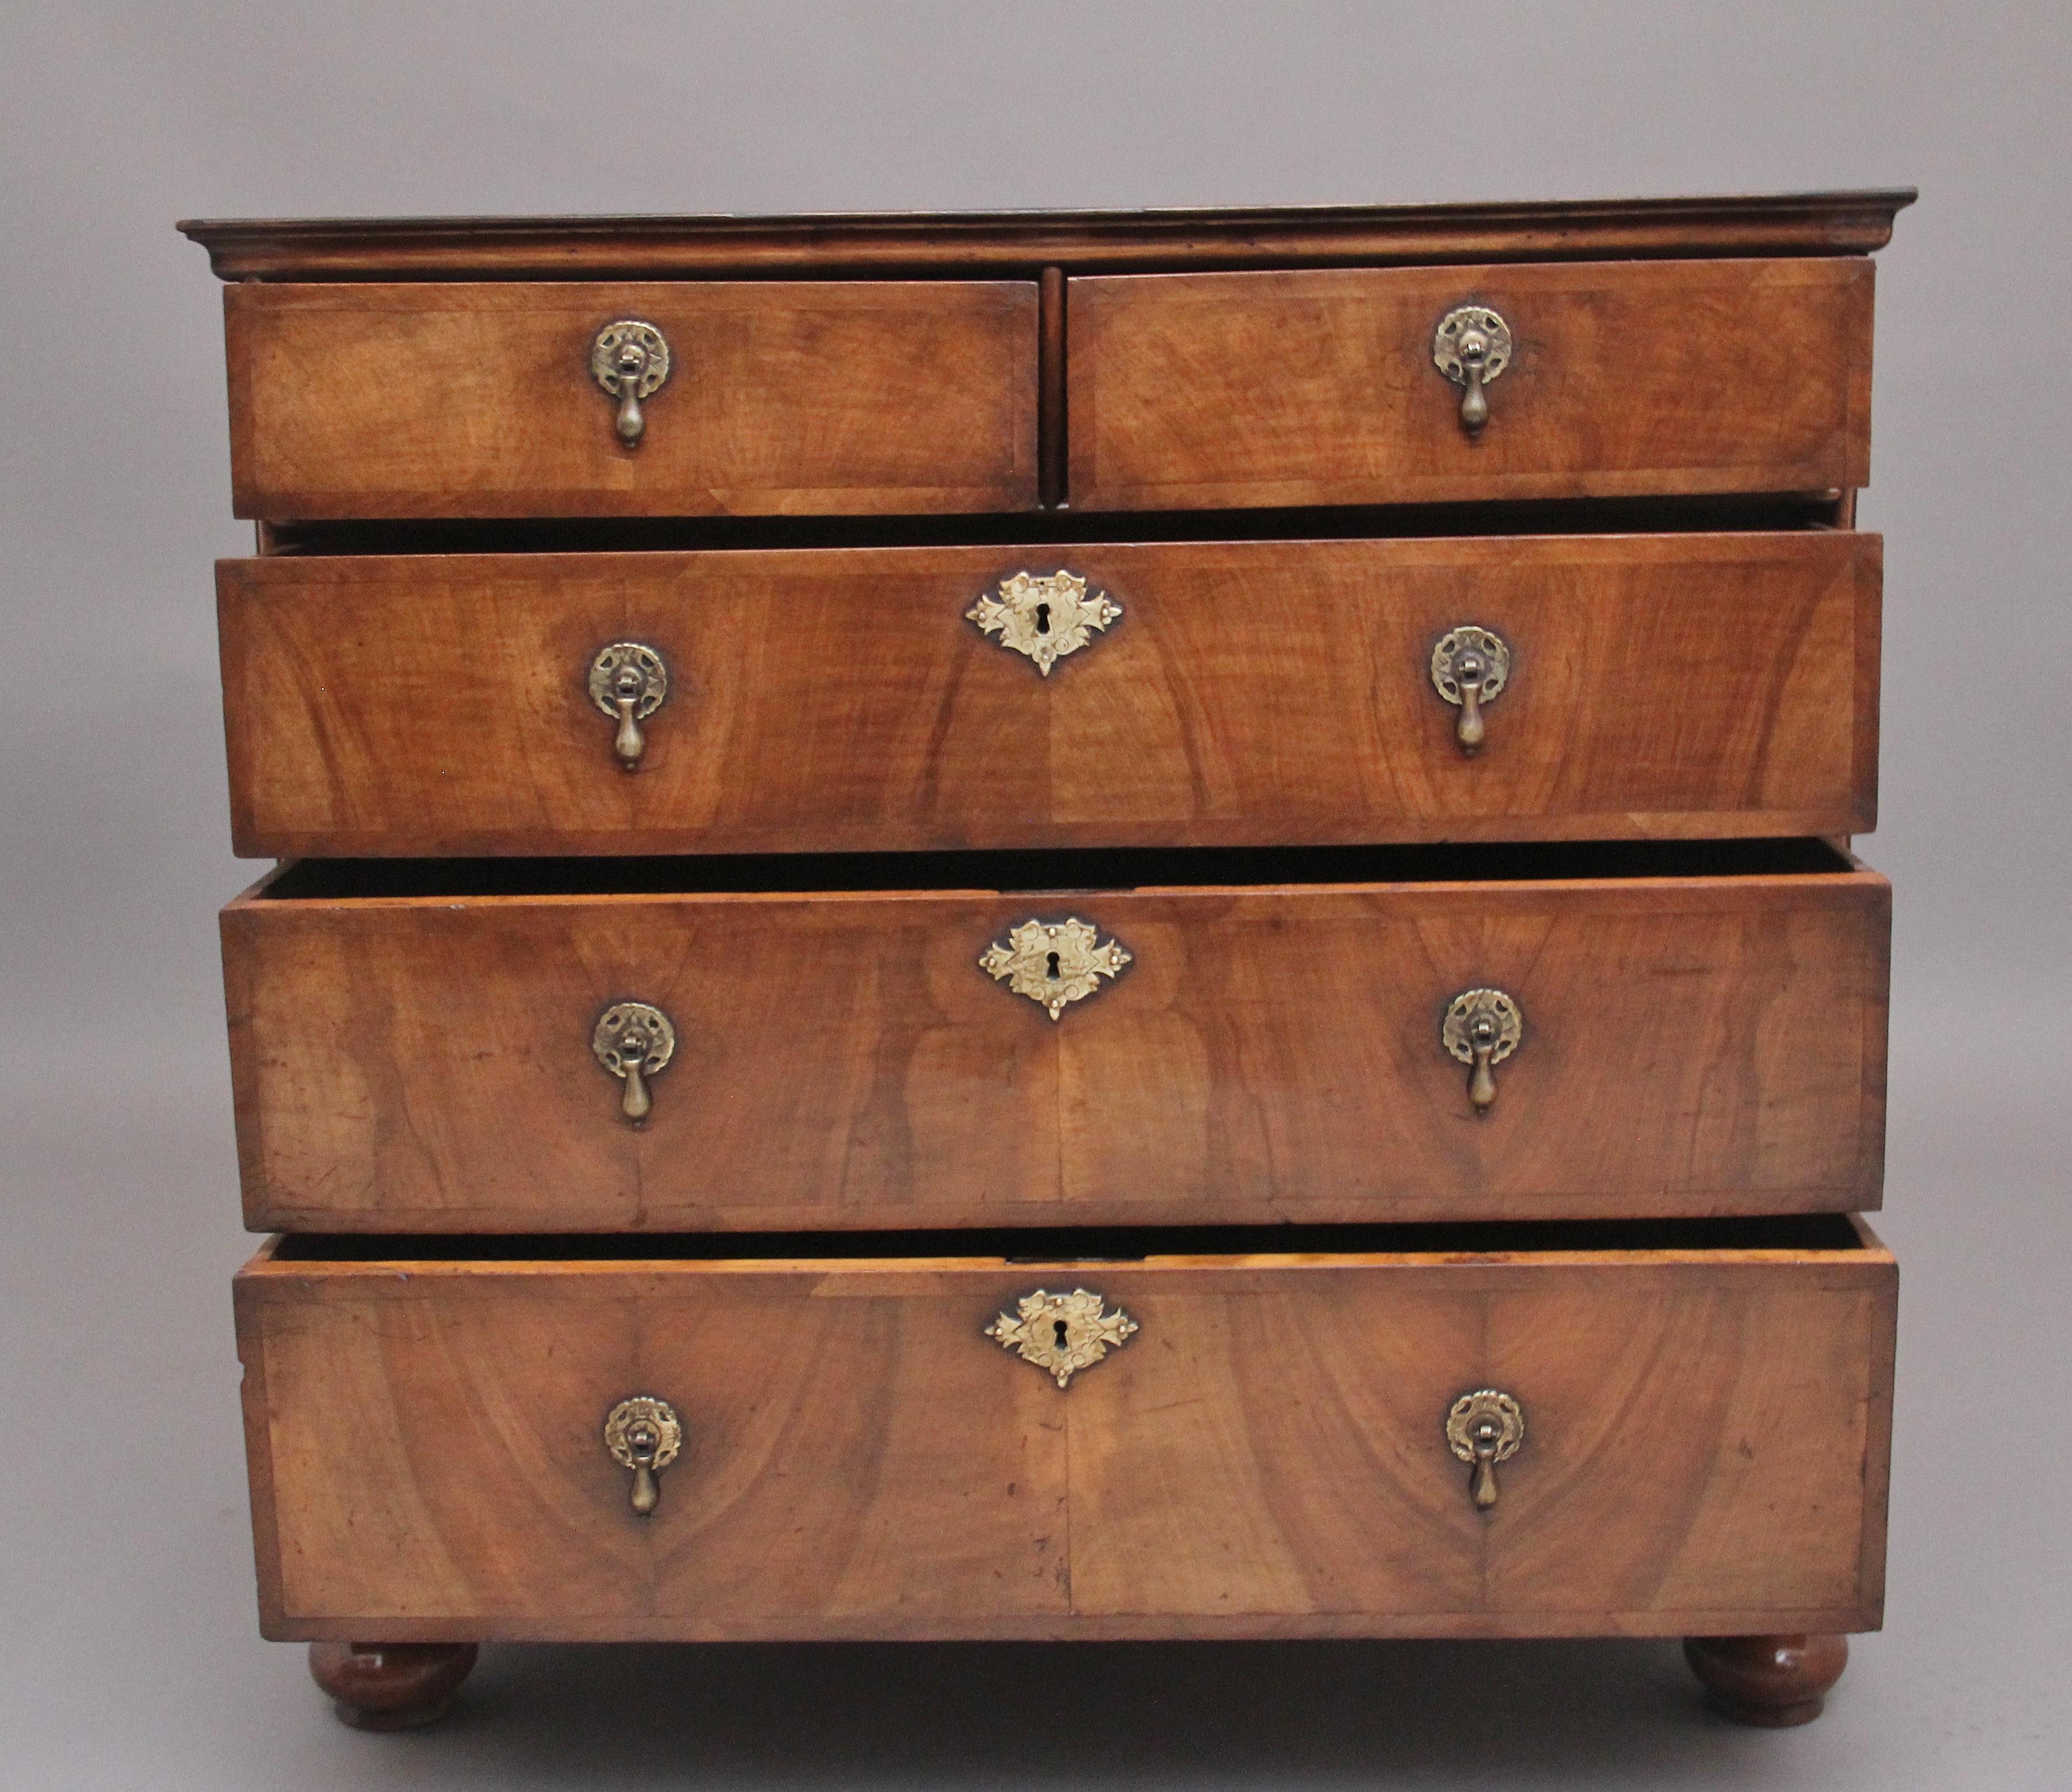 18th century walnut chest of drawers, having a wonderfully figured and crossbanded top with a moulded edge above two short over three oak lined graduated drawers with brass drop handles and escutcheons, standing on elegant turned feet. Lovely walnut